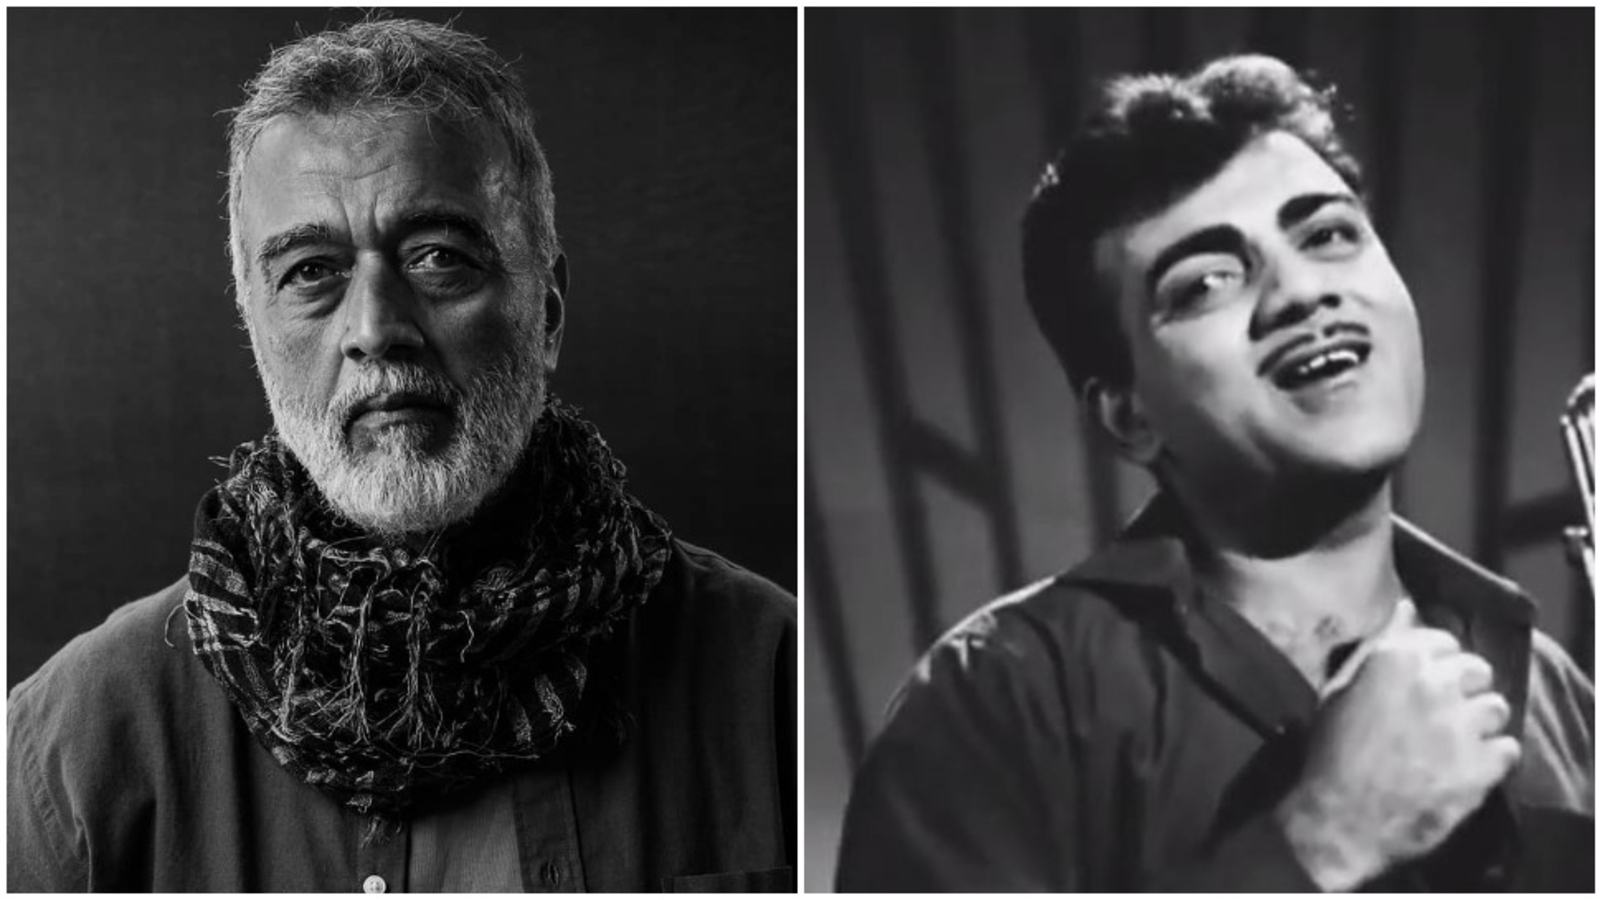 Lucky Ali reveals he ‘wanted to go away’ from Mumbai after dad Mehmood’s death, felt he did not belong here